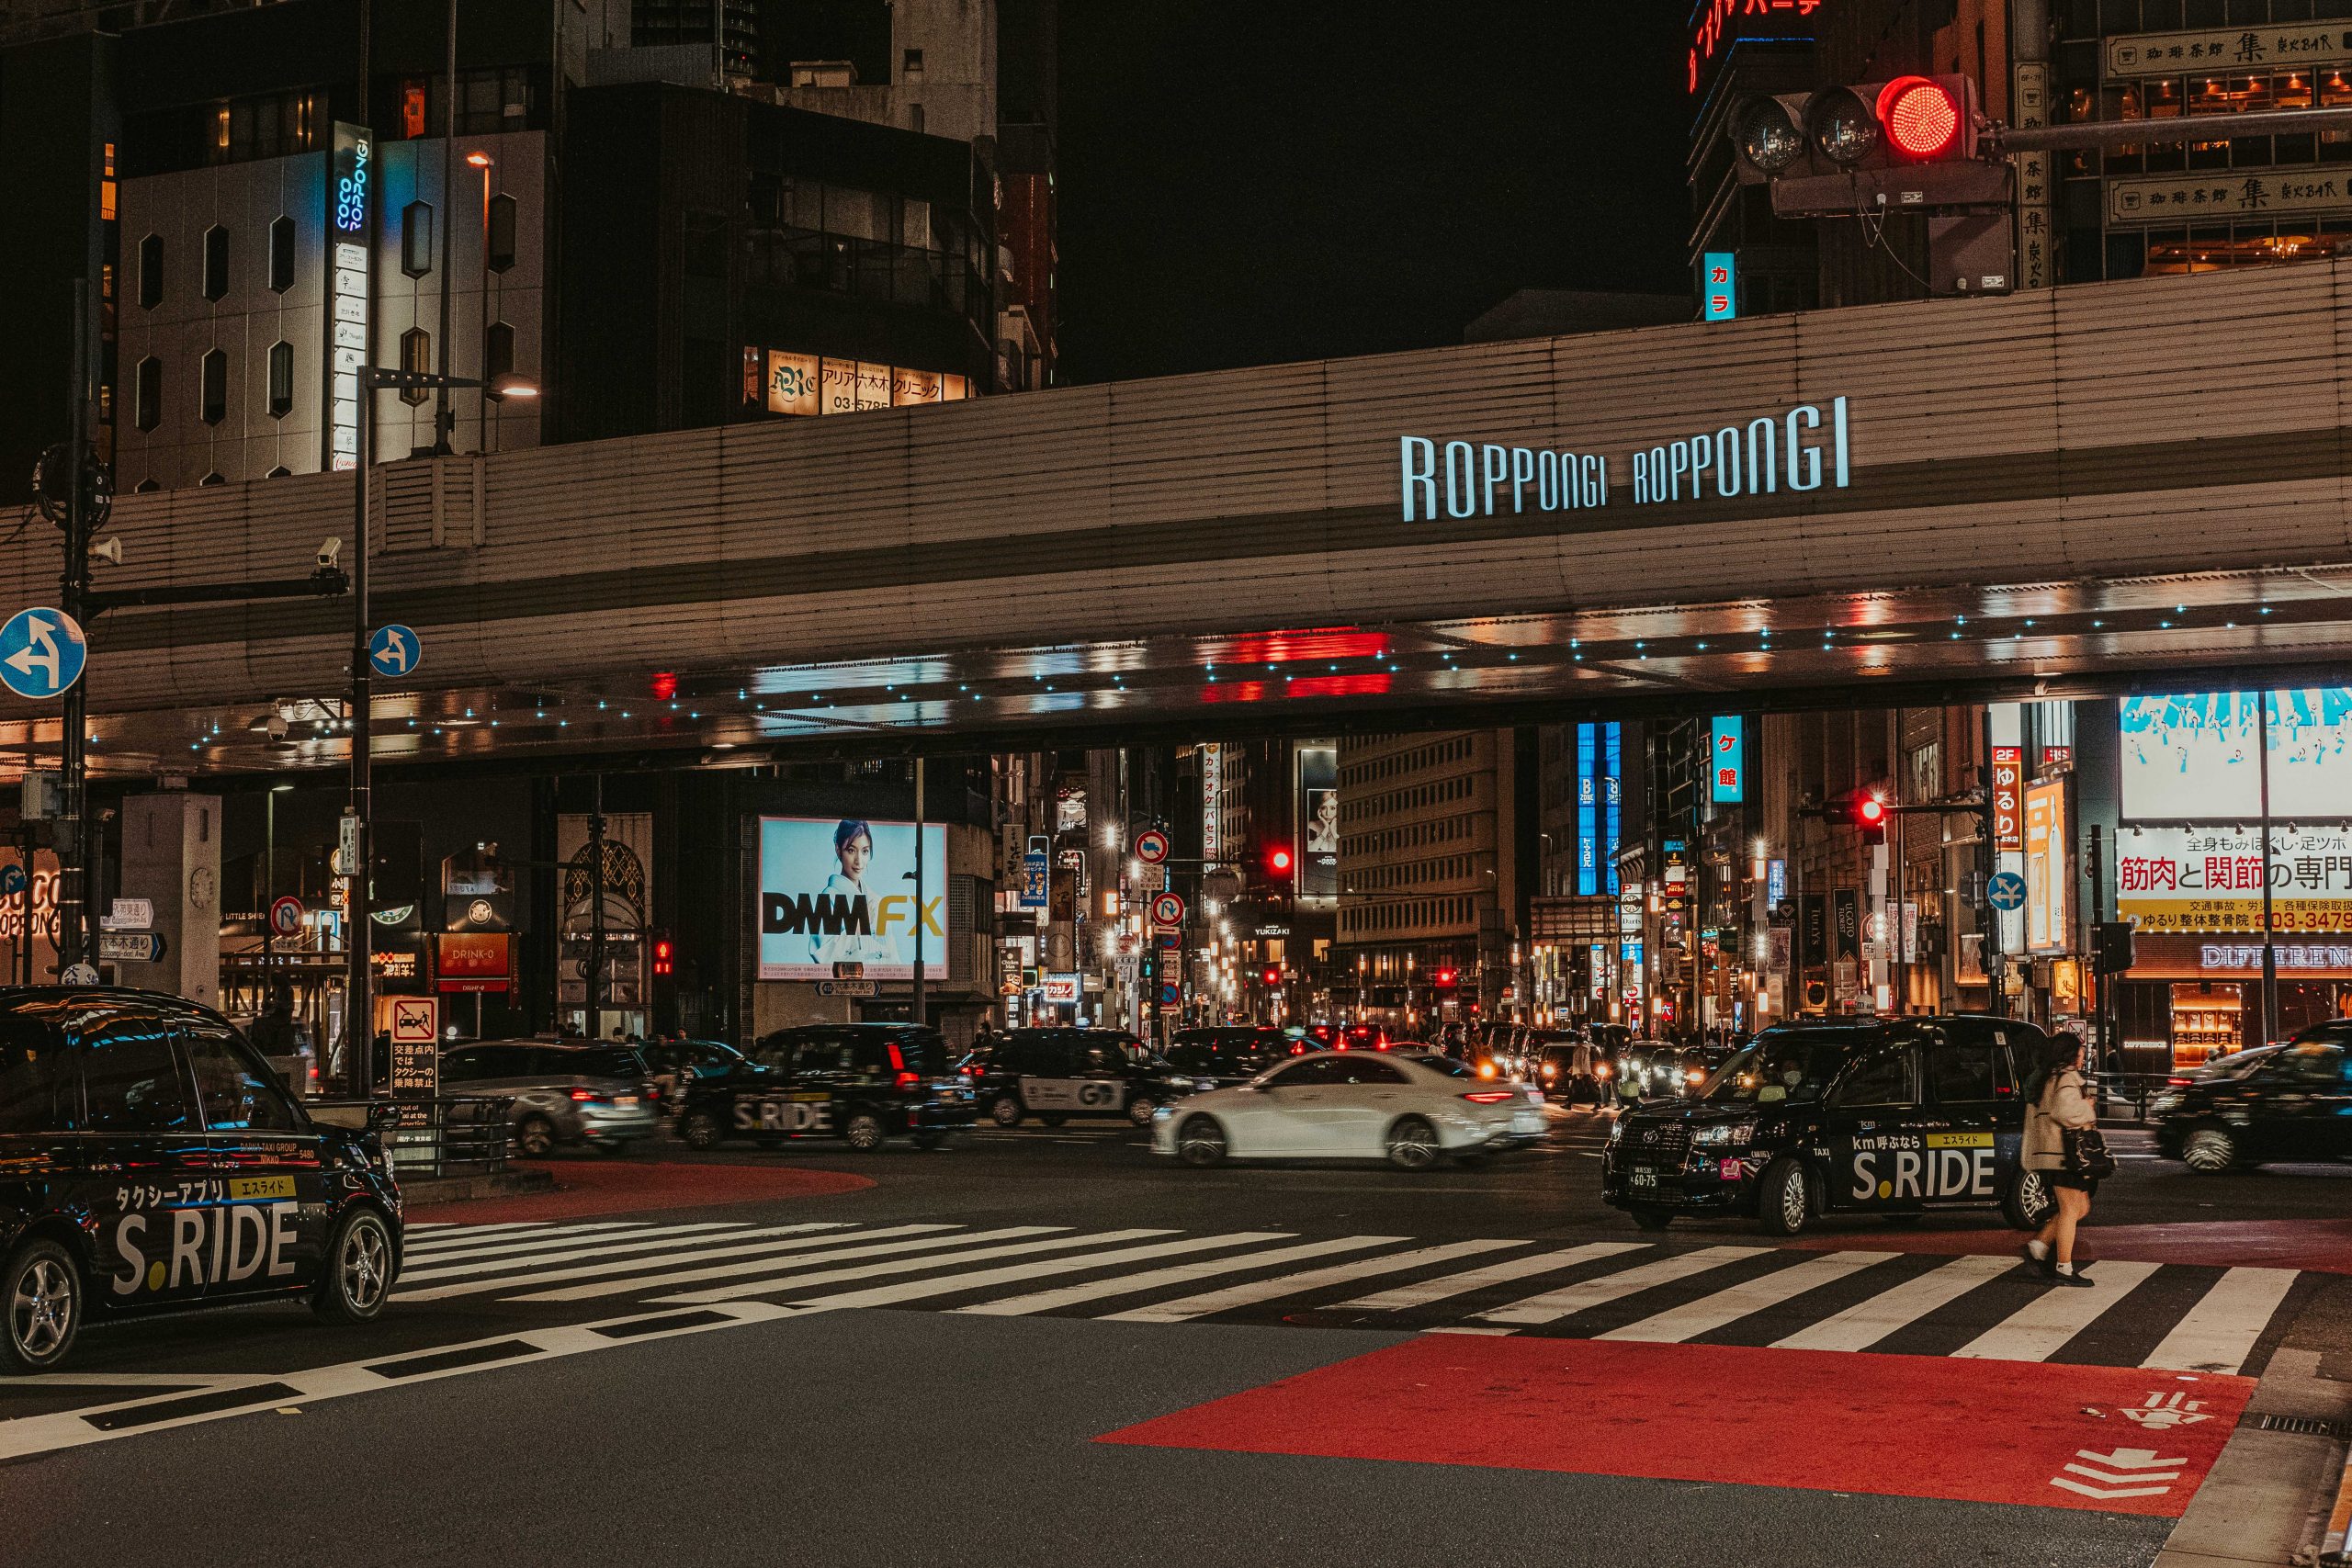 Roppongi district at night - a great place to stay for nightlife